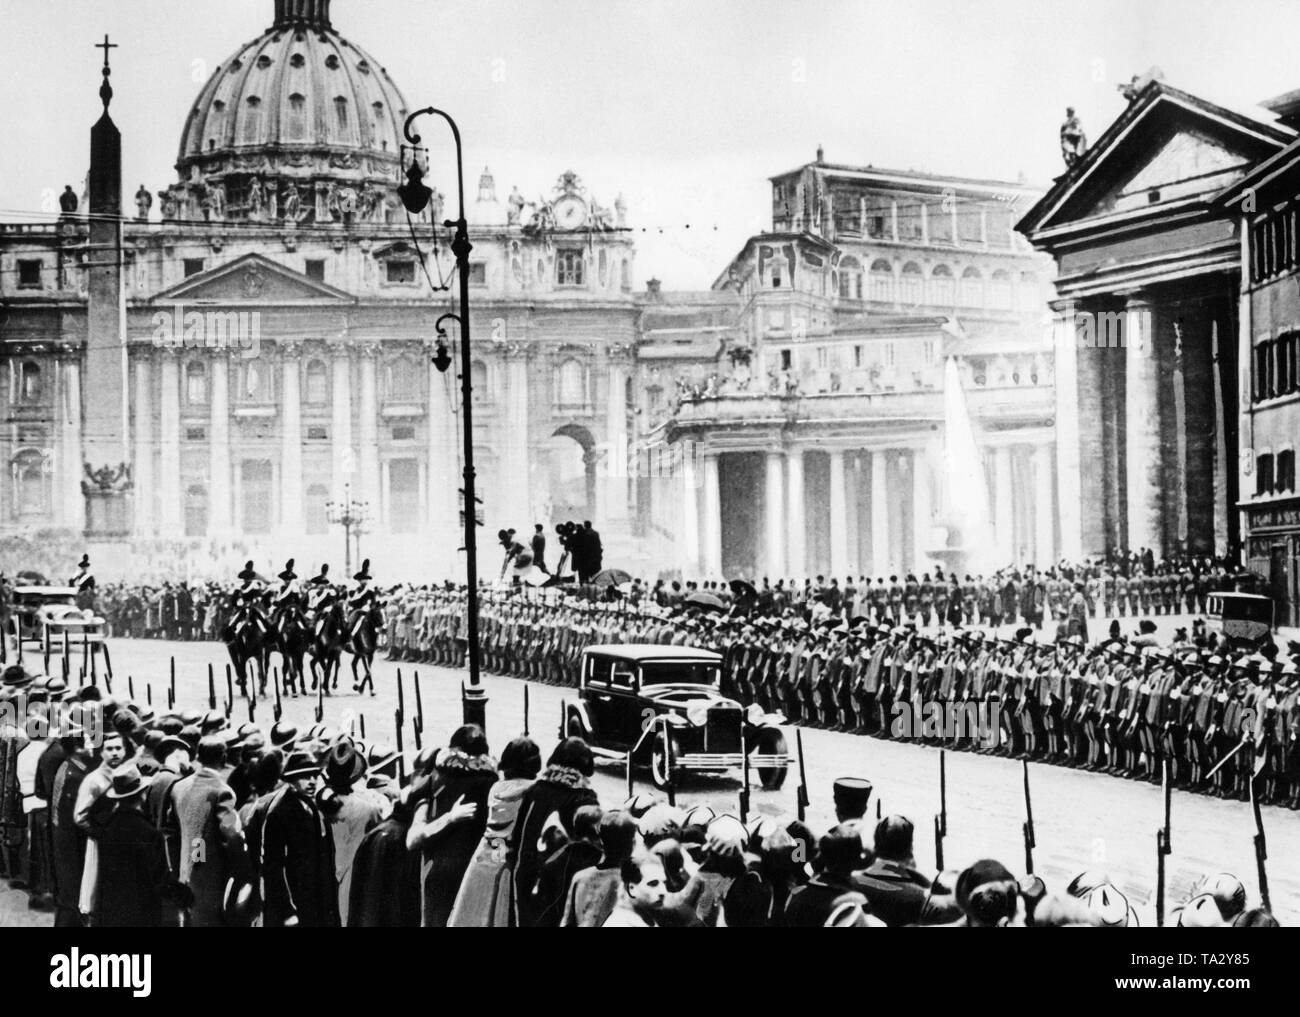 three-years-after-the-conclusion-of-the-lateran-treaty-pope-pius-xi